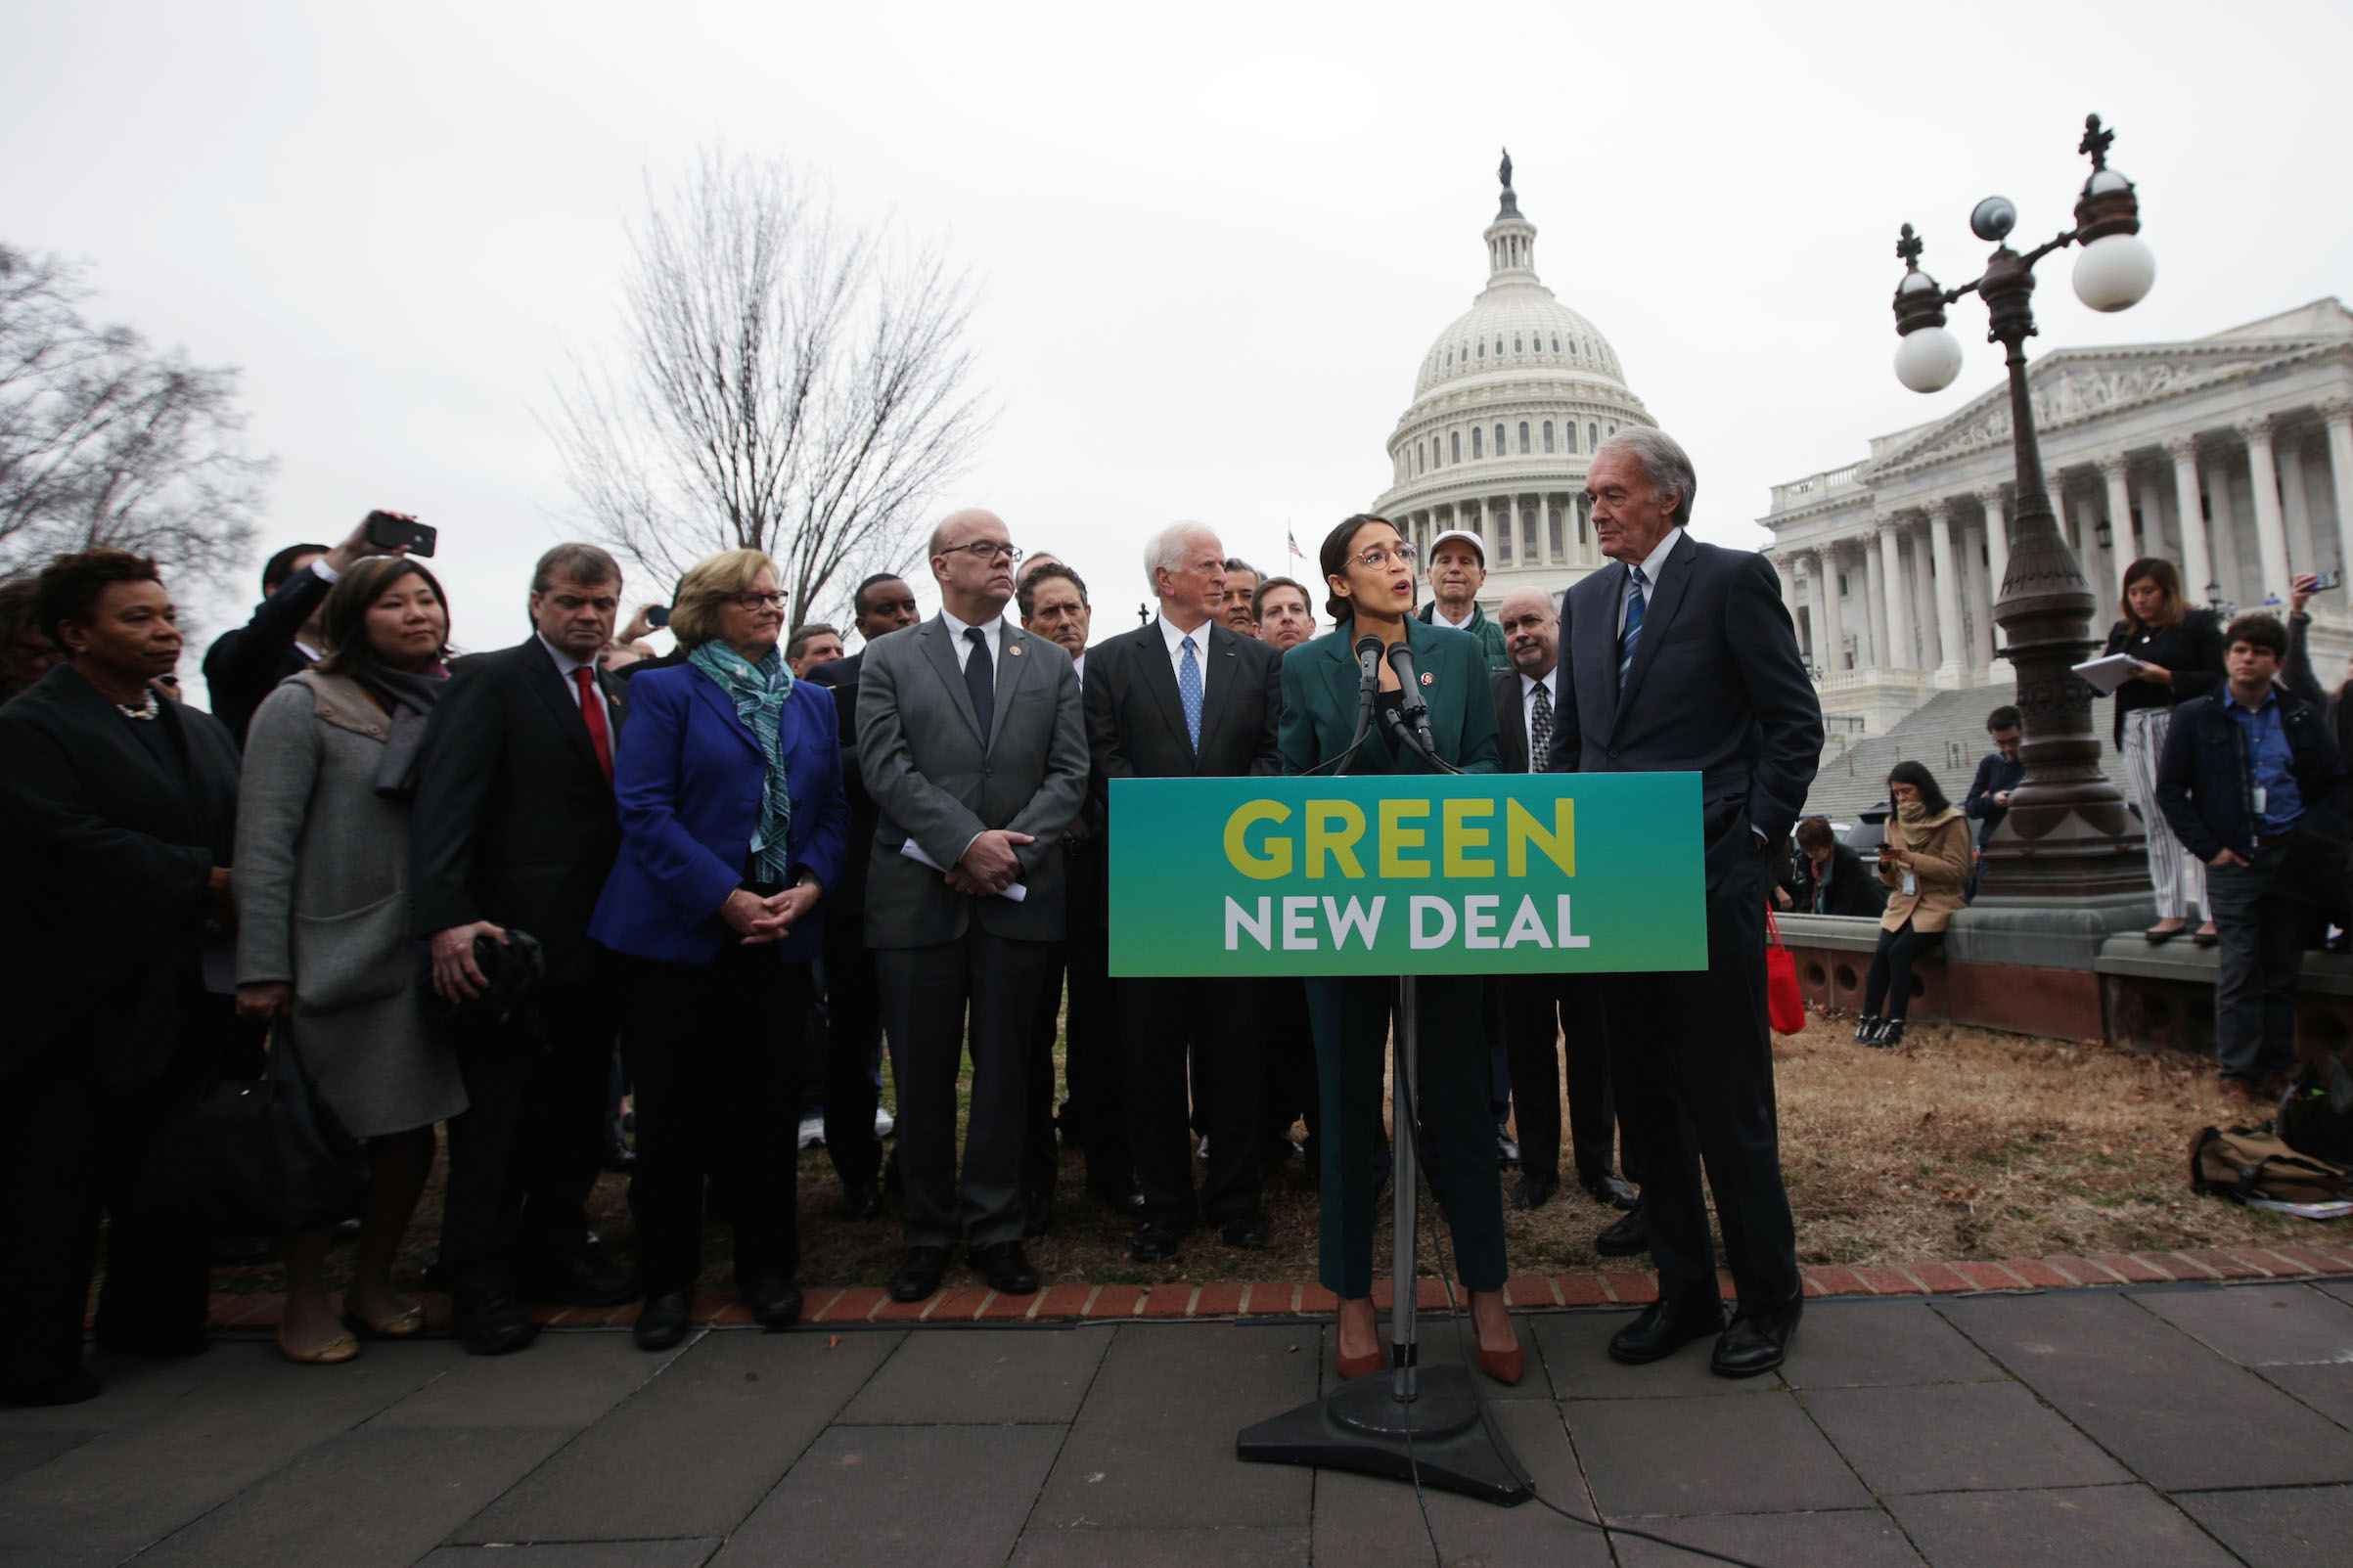 Rep. Alexandria Ocasio-Cortez speaks as Sen. Ed Markey and other Congressional Democrats listen during a news conference in front of the U.S. Capitol in Washington, on Feb. 7, 2019. Sen. Markey and Rep. Ocasio-Cortez held a news conference to unveil their Green New Deal resolution. (Alex Wong—Getty Images)